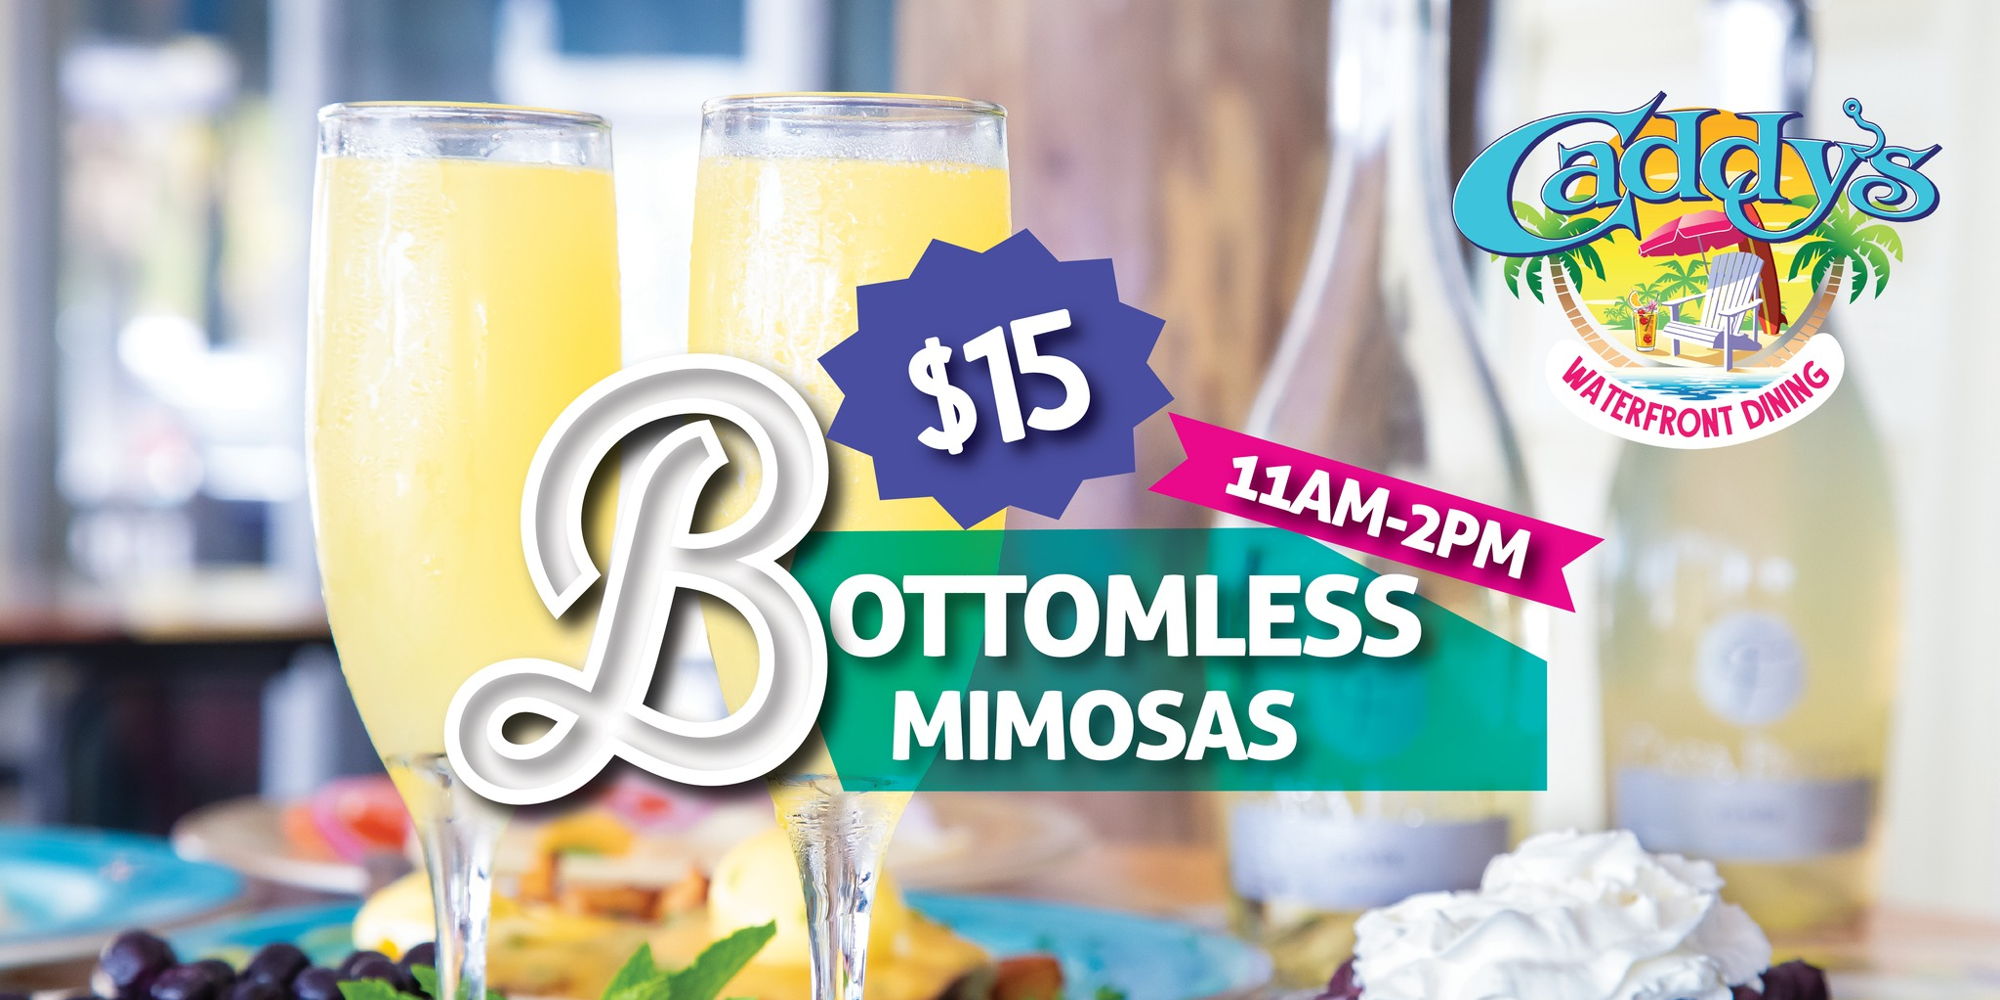 Bottomless Weekends! promotional image